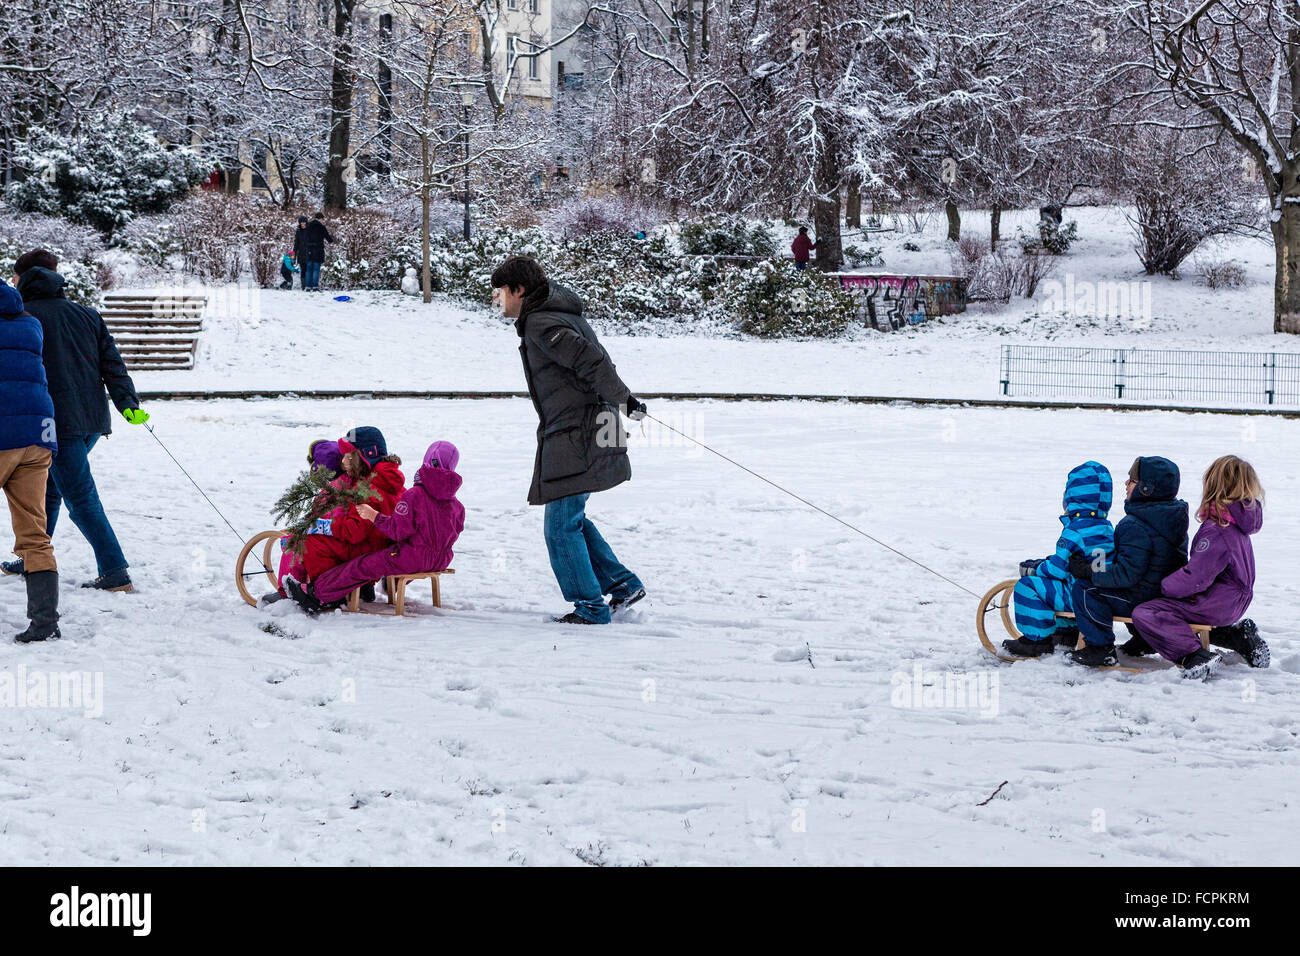 Berlin. Children pulled on sleds by parents after sledding in snowy Public park in winter, Volkspark am Weinbergsweg, Berlin Stock Photo